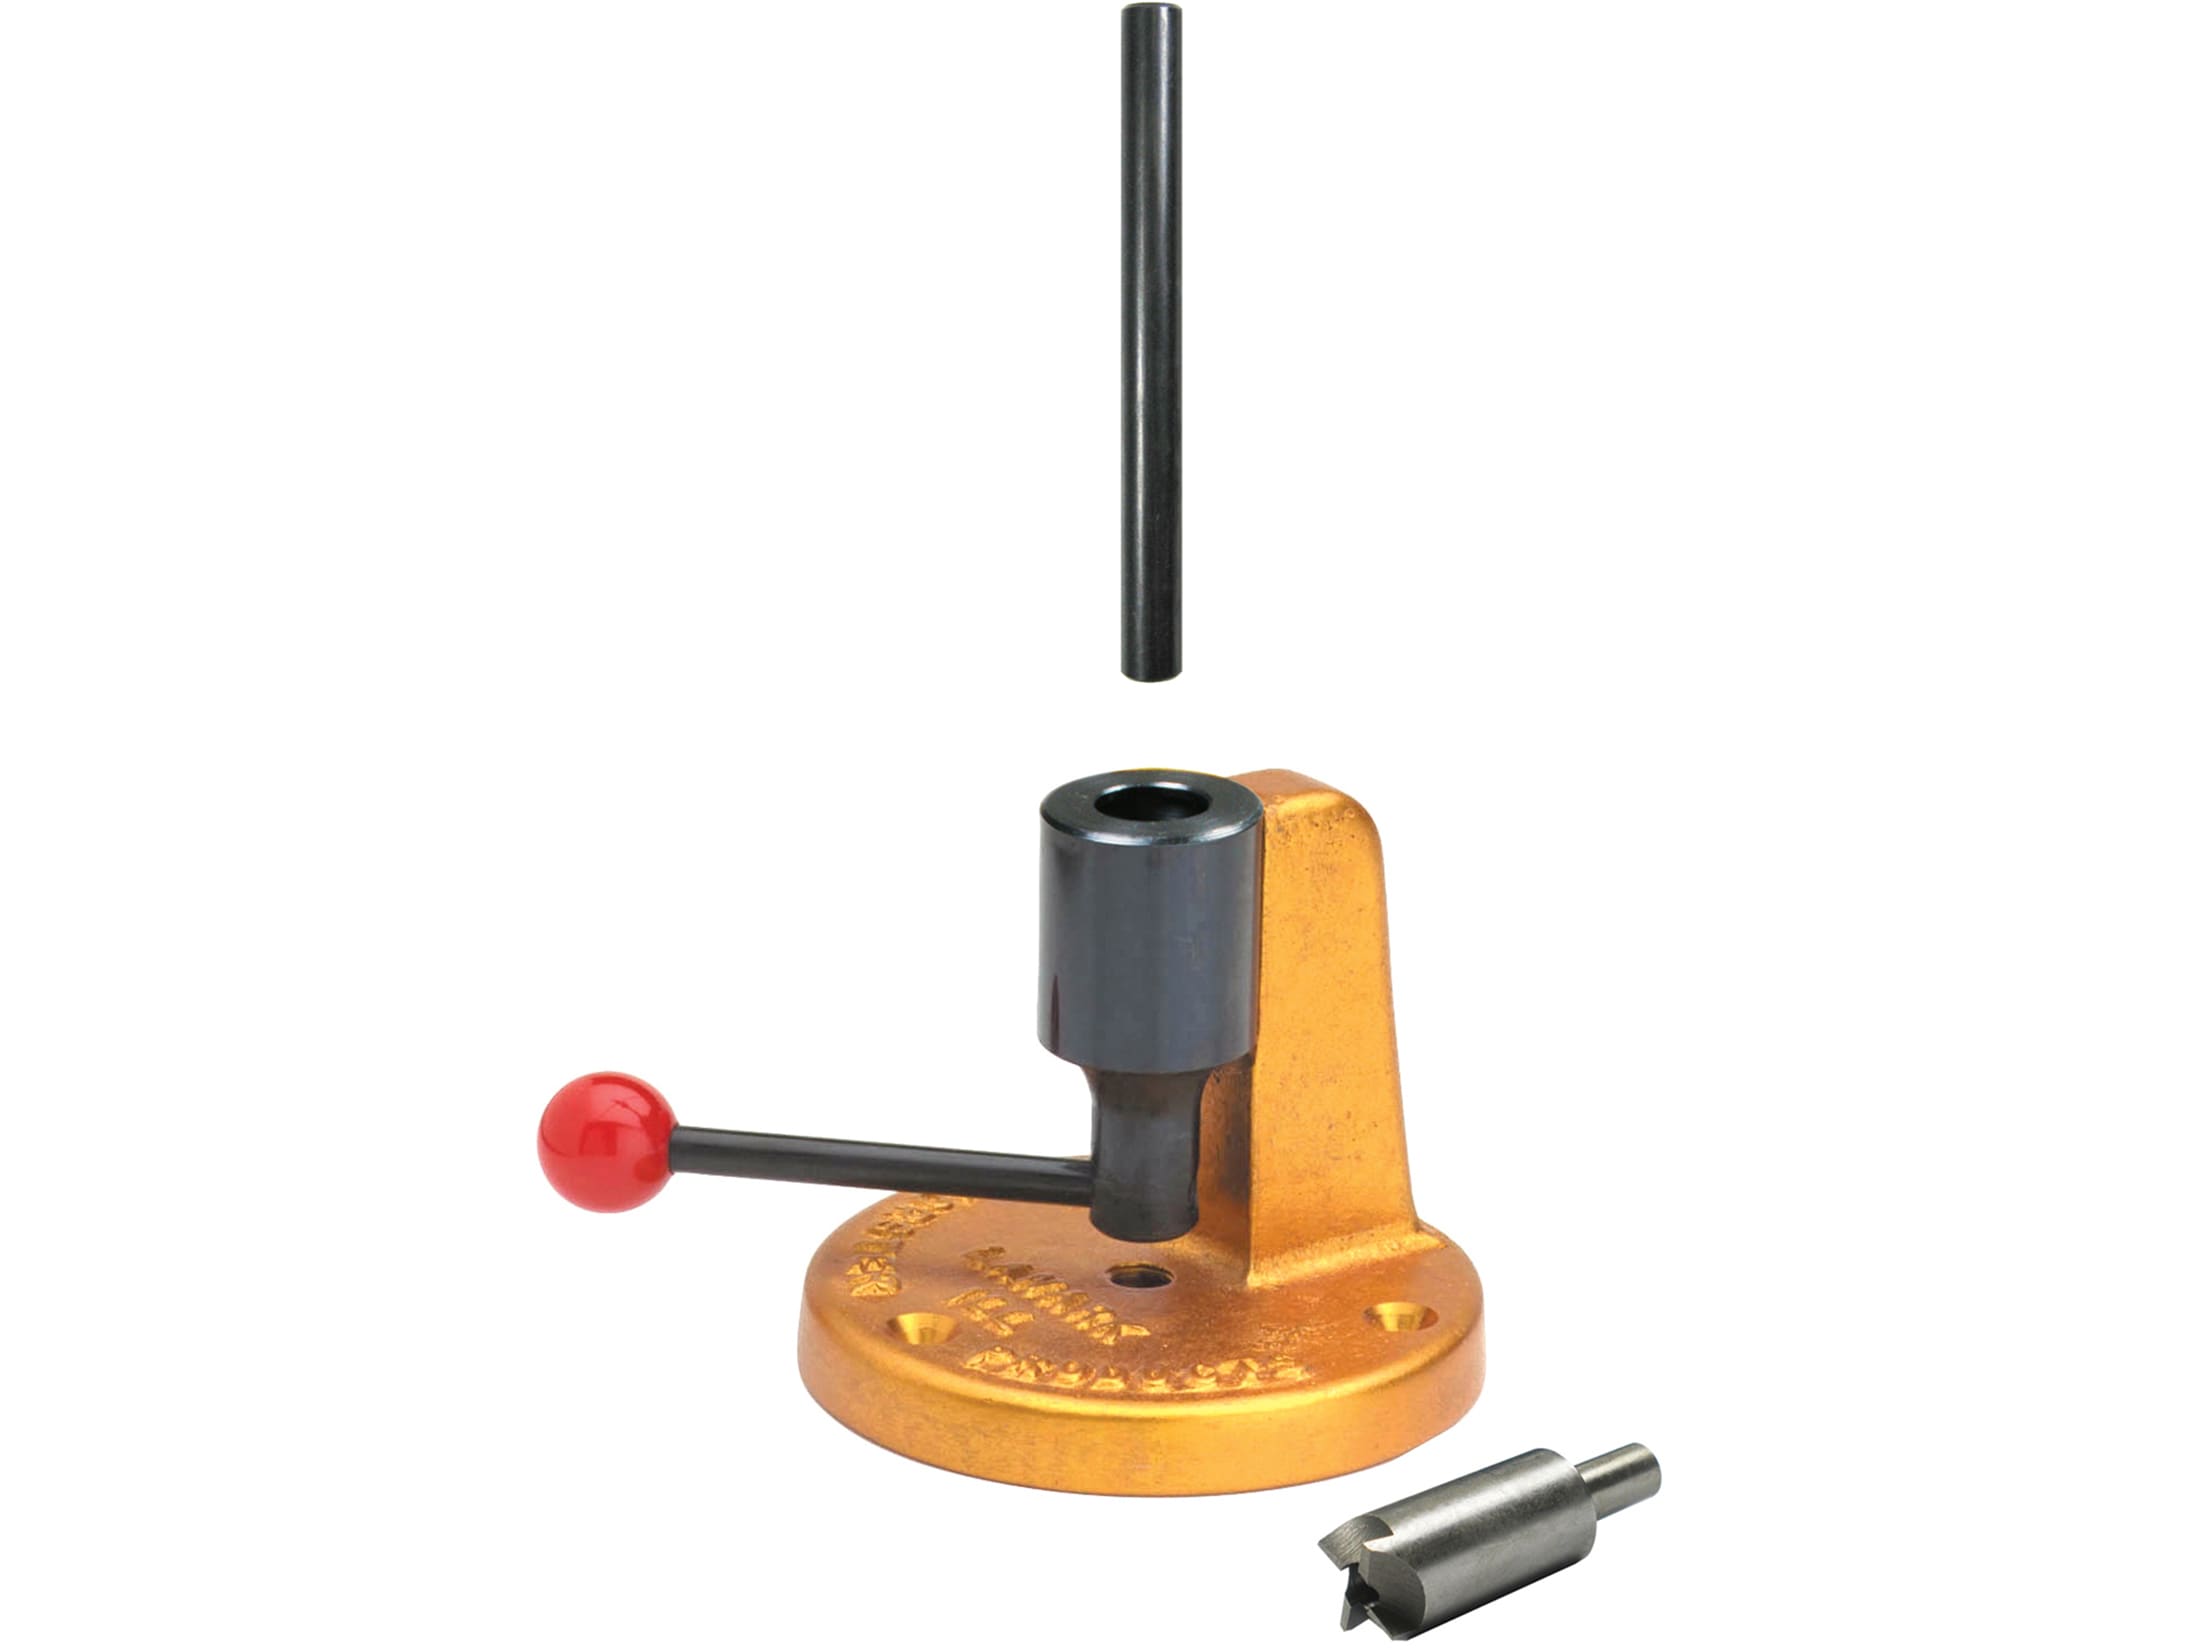 Classic Case Trimmer - Forster Products